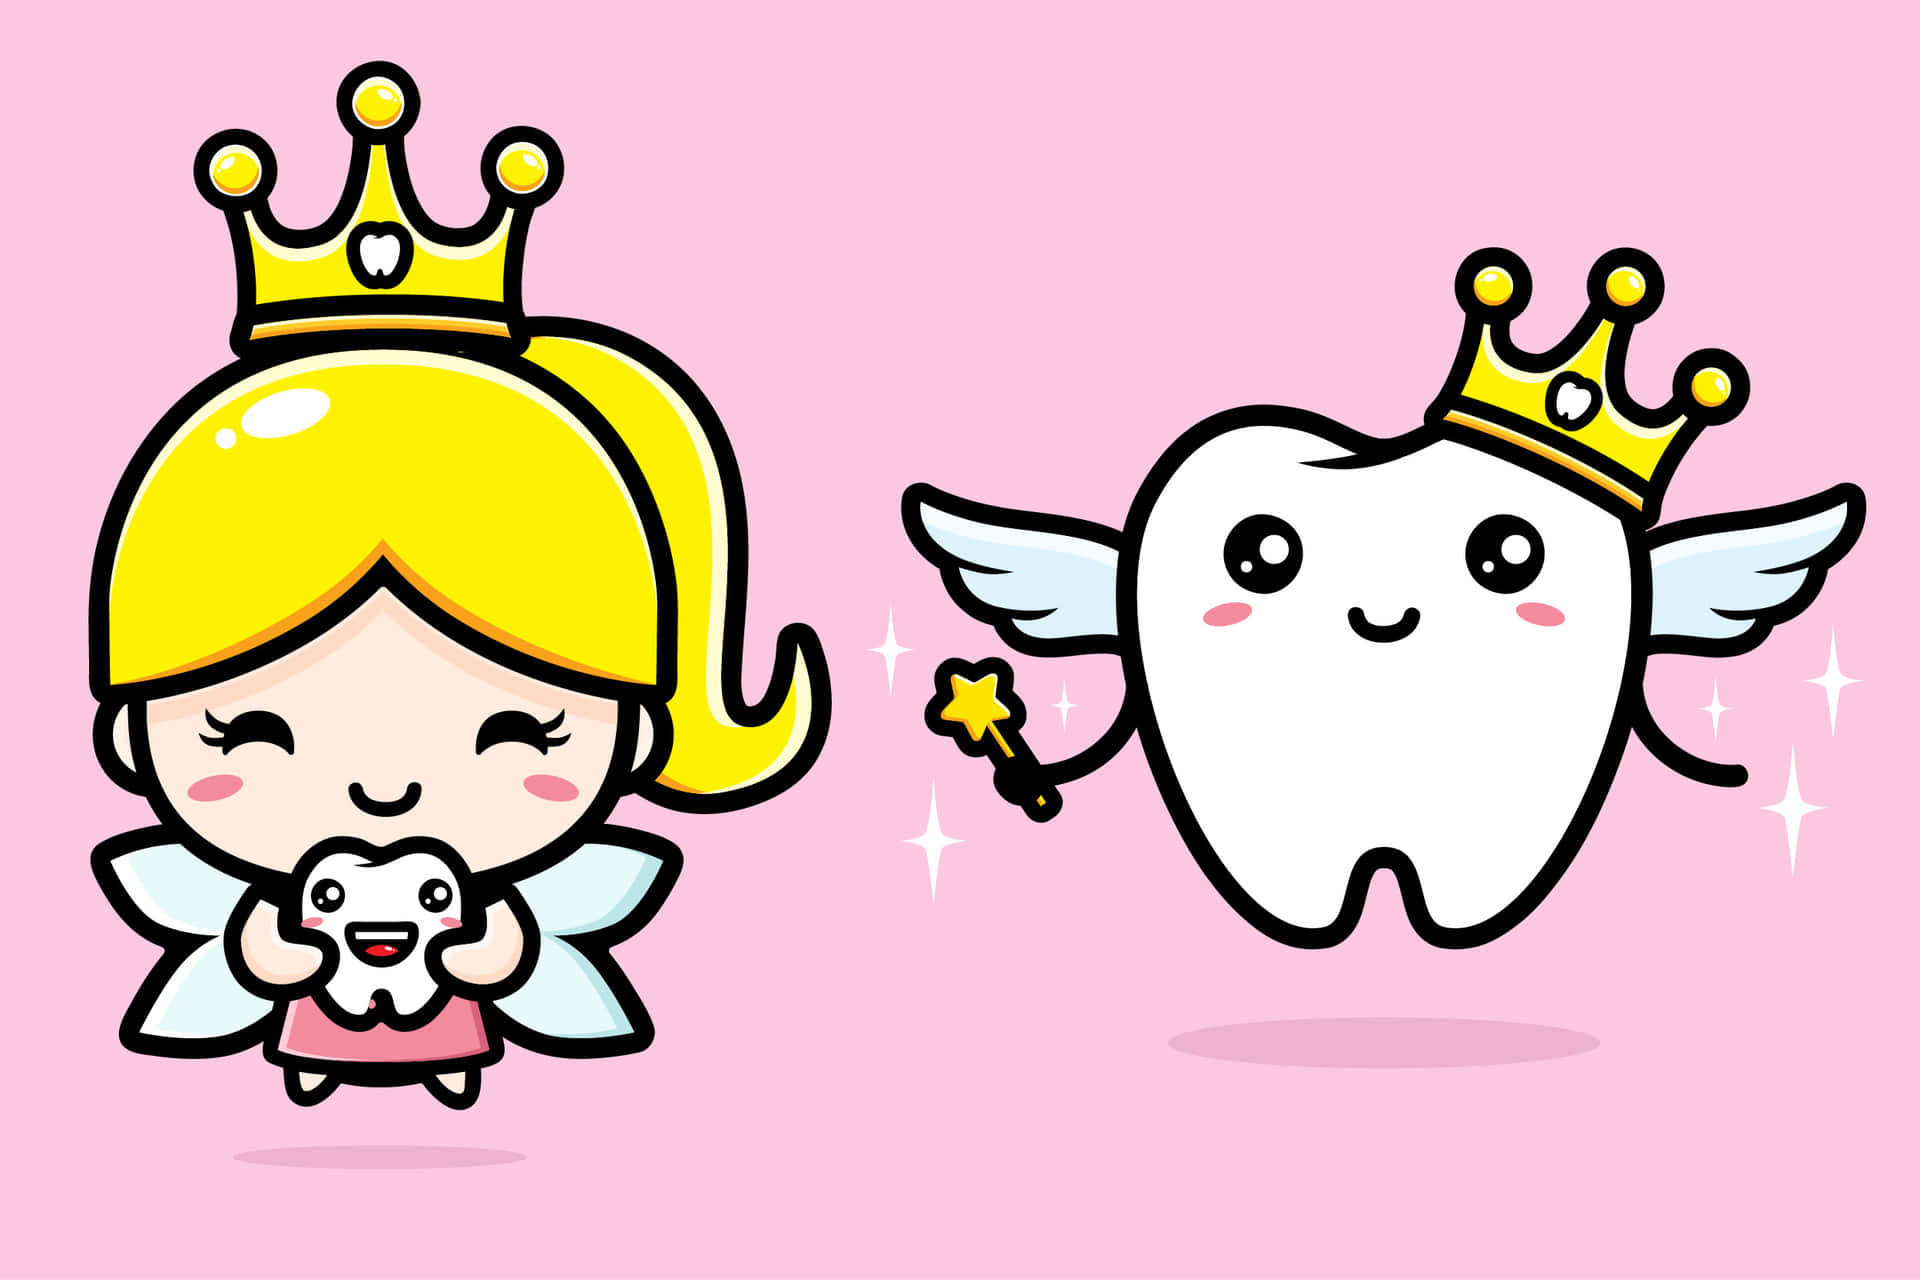 A Cartoon Tooth And A Princess With Crowns